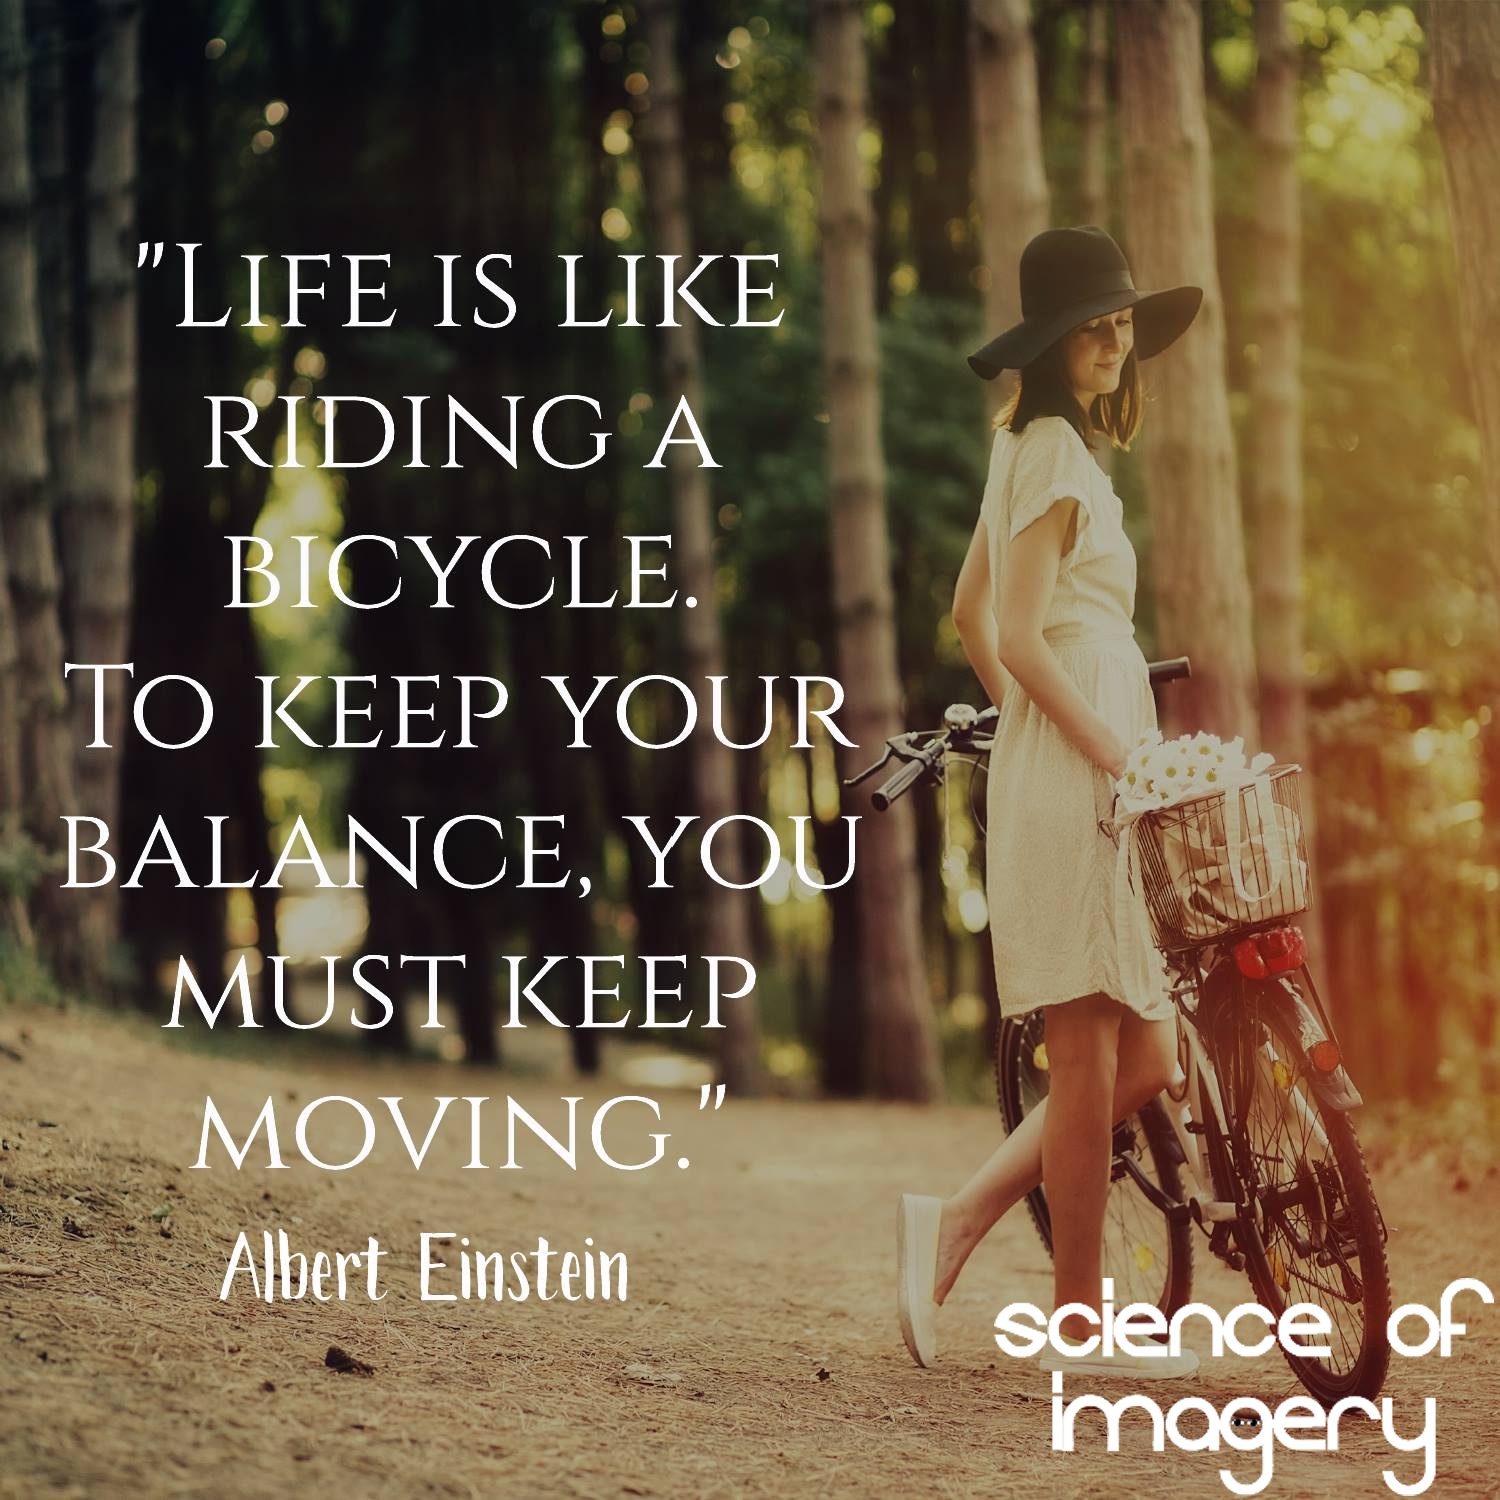 Keep Moving And Stay Balanced | Science Of Imagery